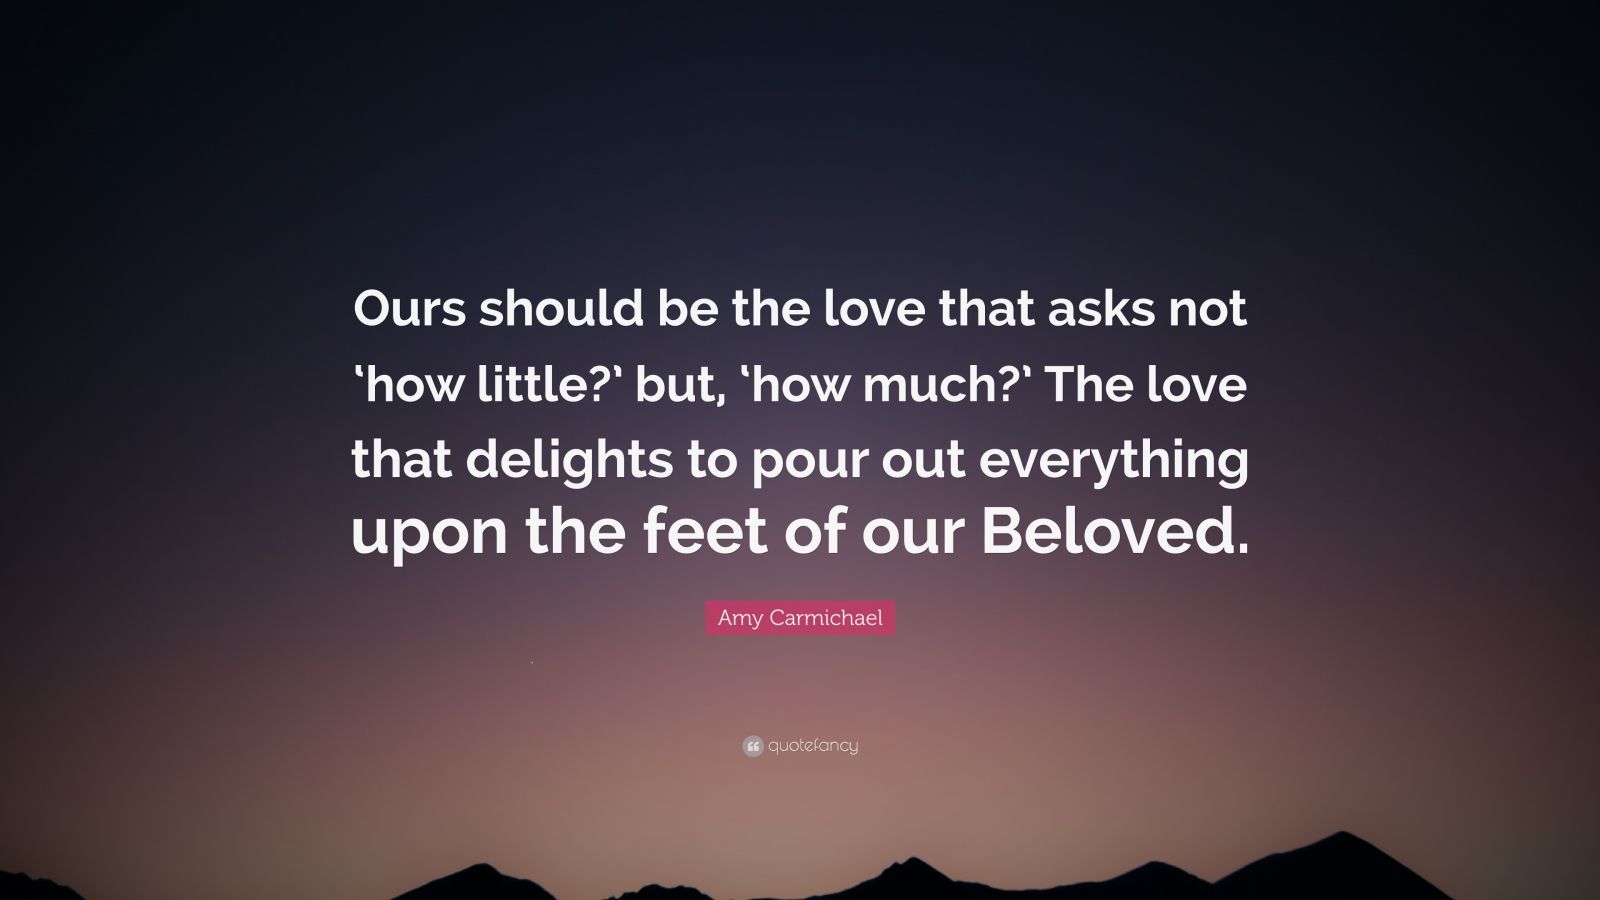 Amy Carmichael Quote “Ours should be the love that asks